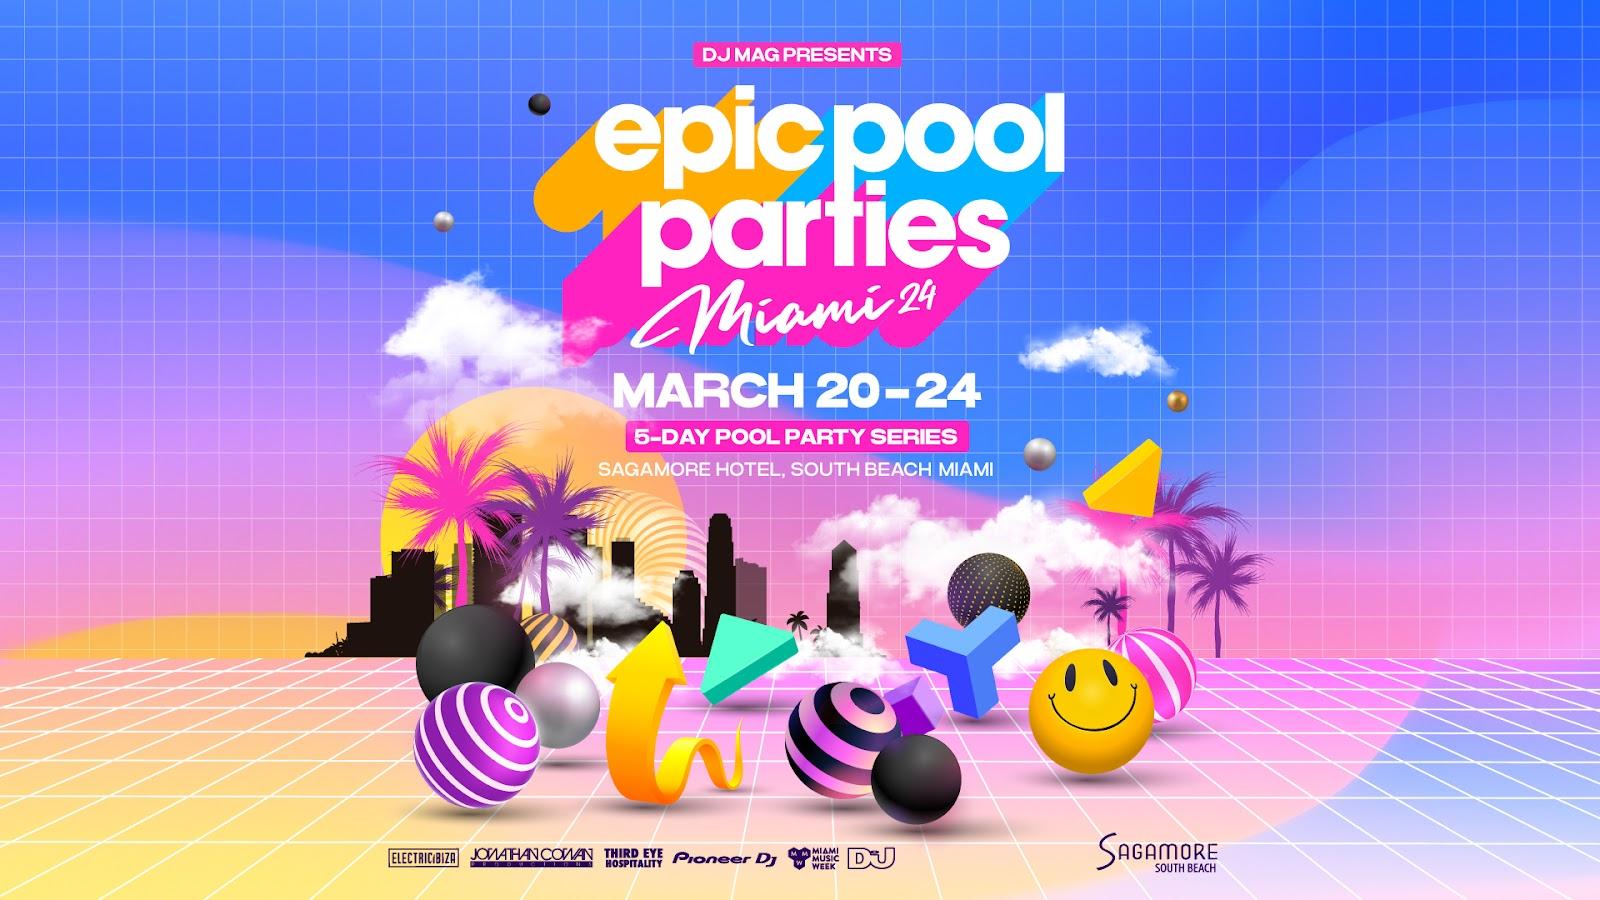 Epic Pool Parties announce brand takeovers for Miami Music Week